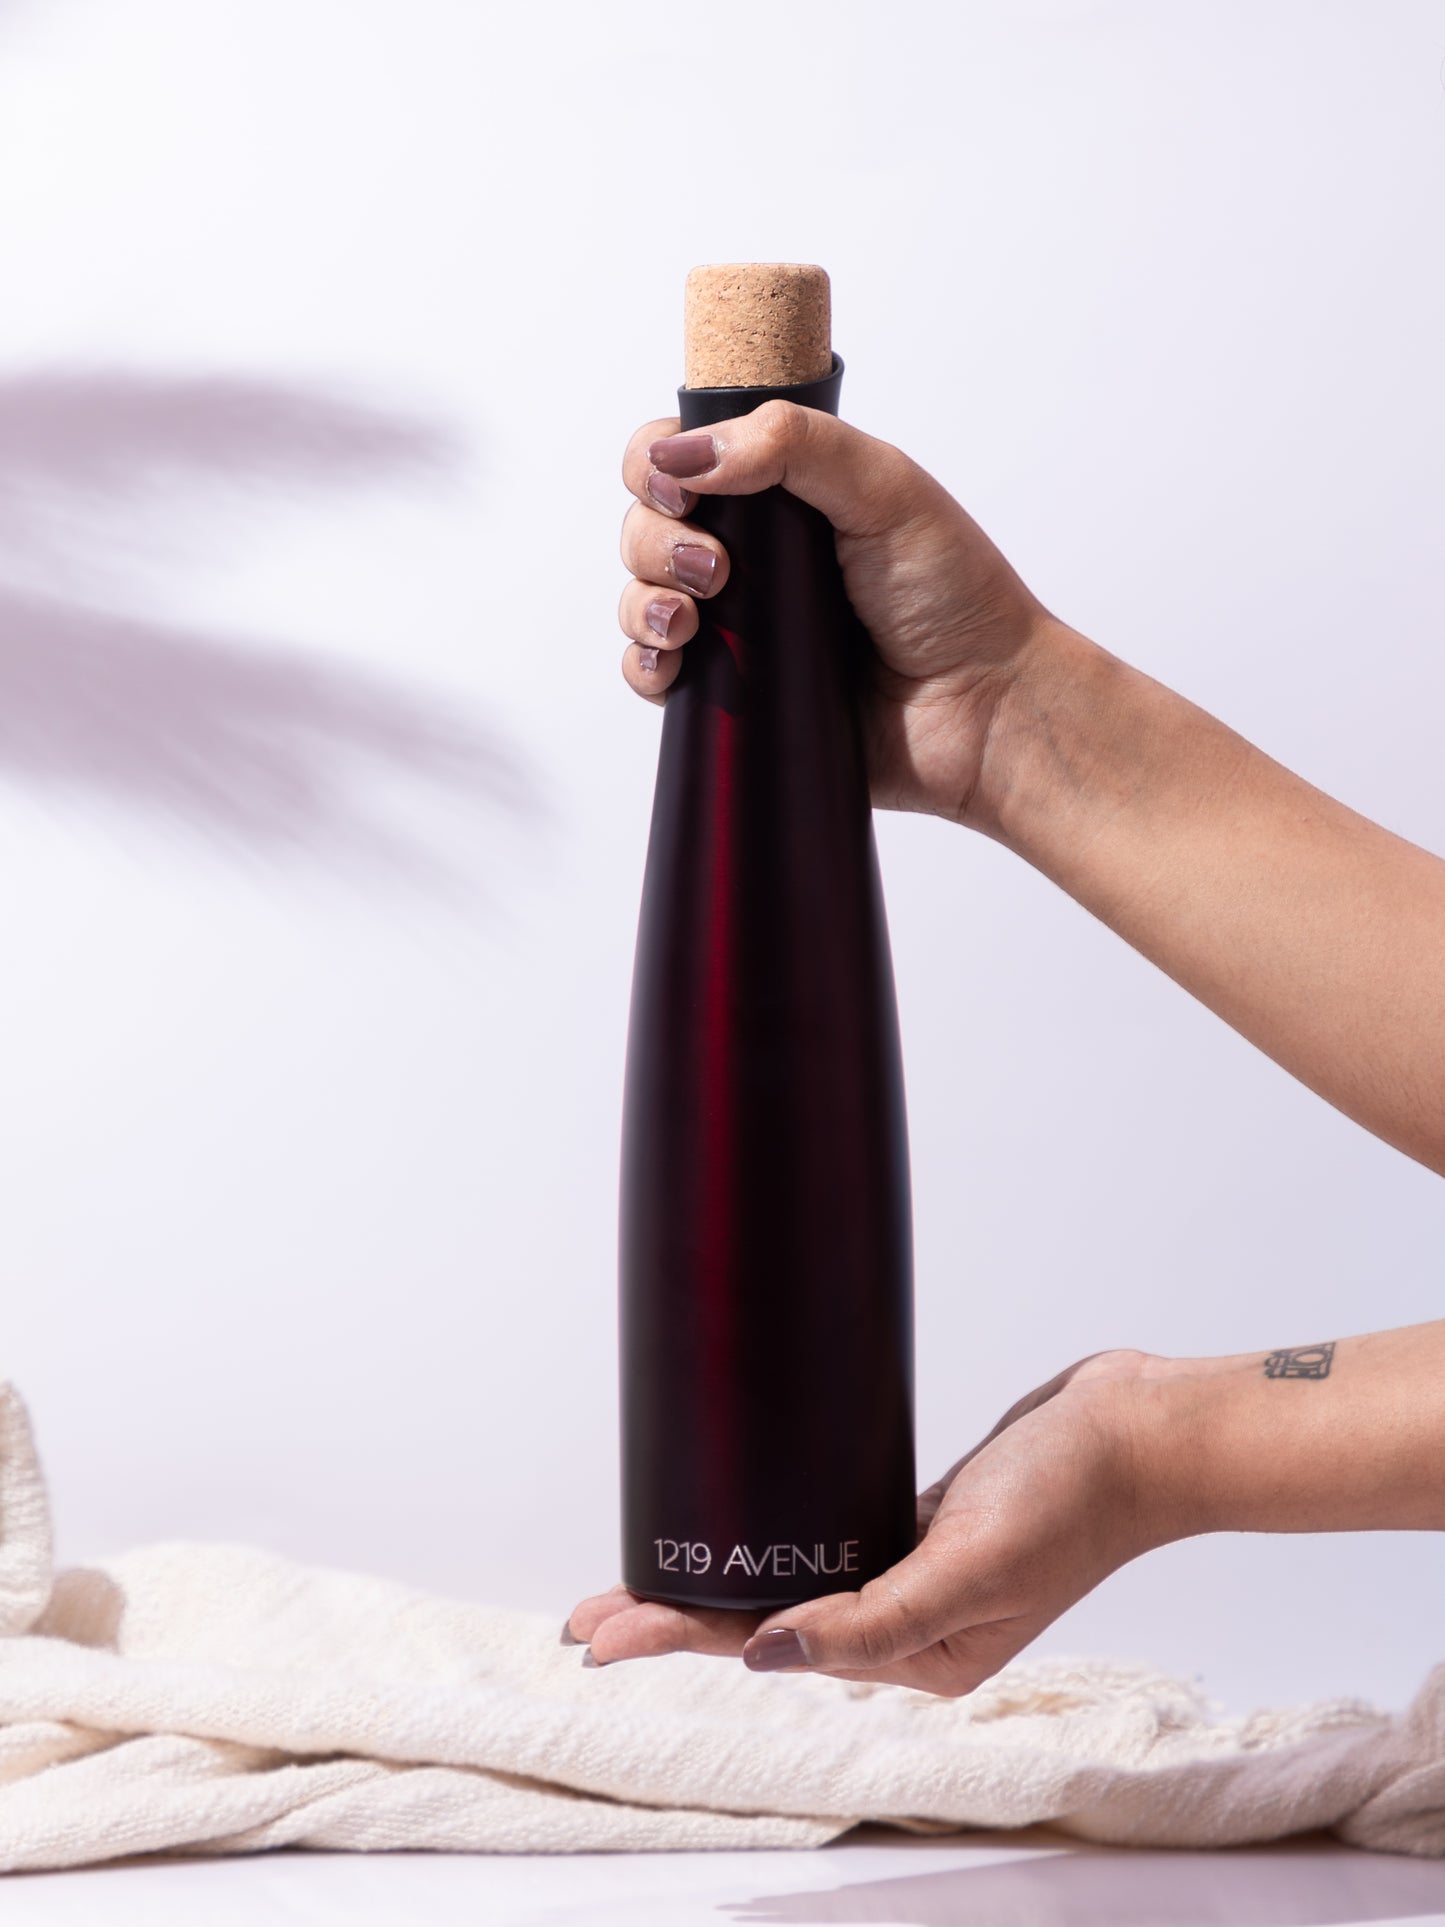 1219 Avenue Recherche Wine Shaped Premium Insulated Bottles 18hrs+ Hot and Cold